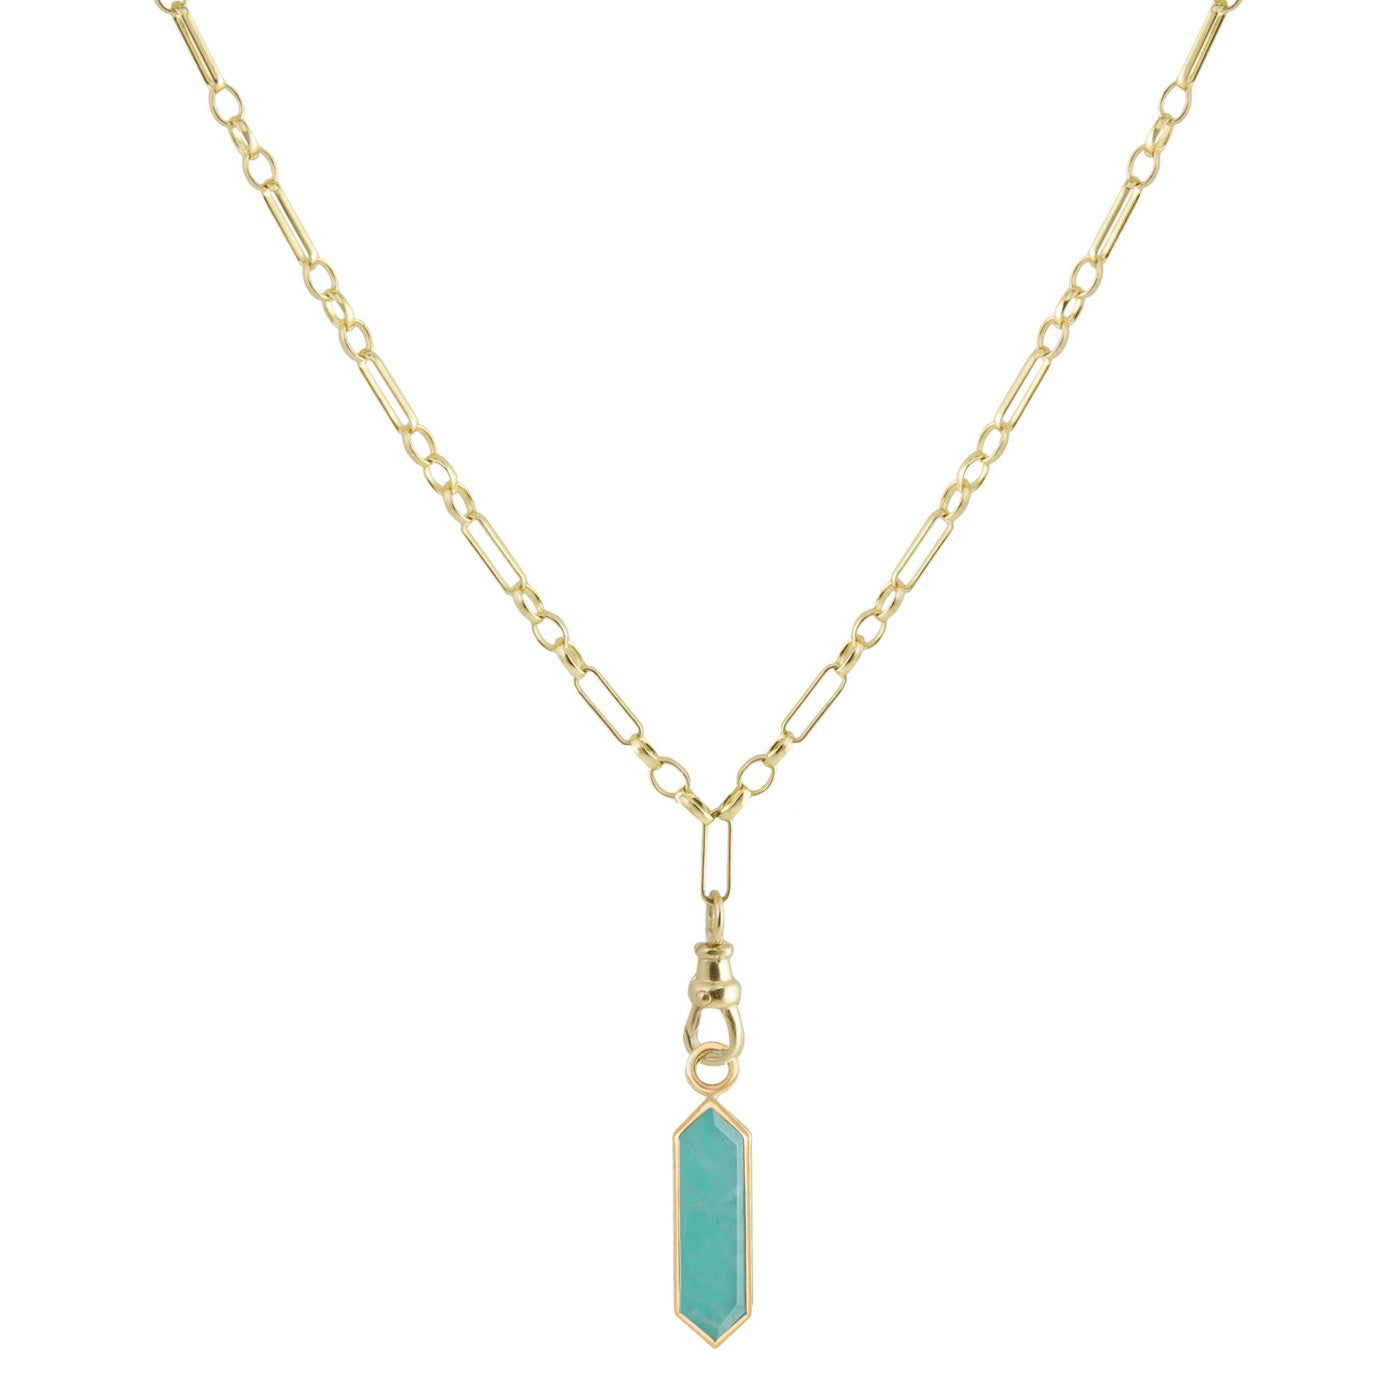 metier by tomfoolery 9ct yellow gold and amazonite hexa plaque on a swivel an eiffel chain. Necklace.